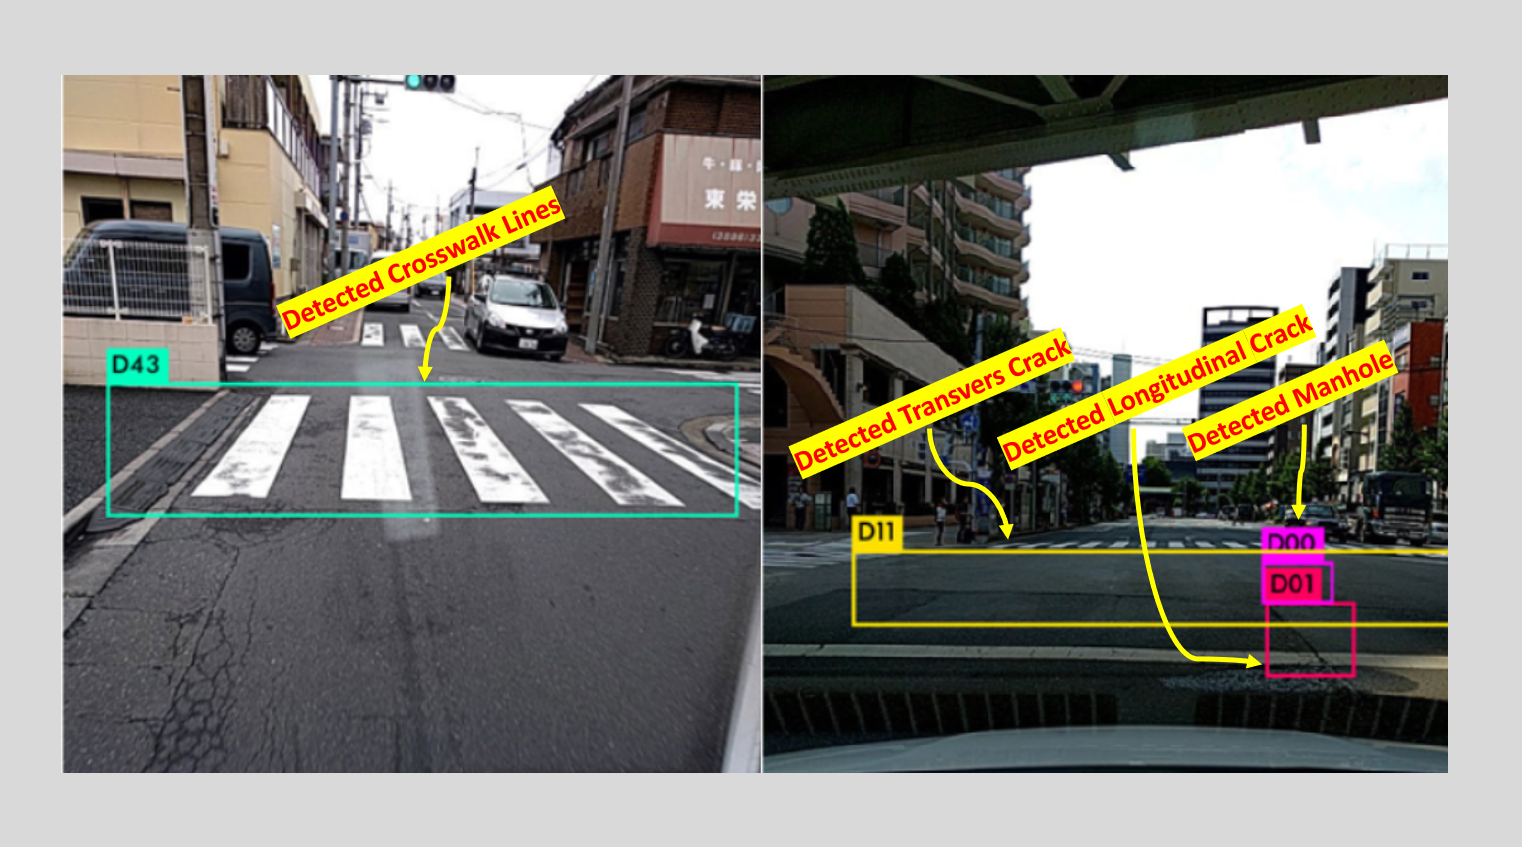 Object Detection Using Trained YOLOv3